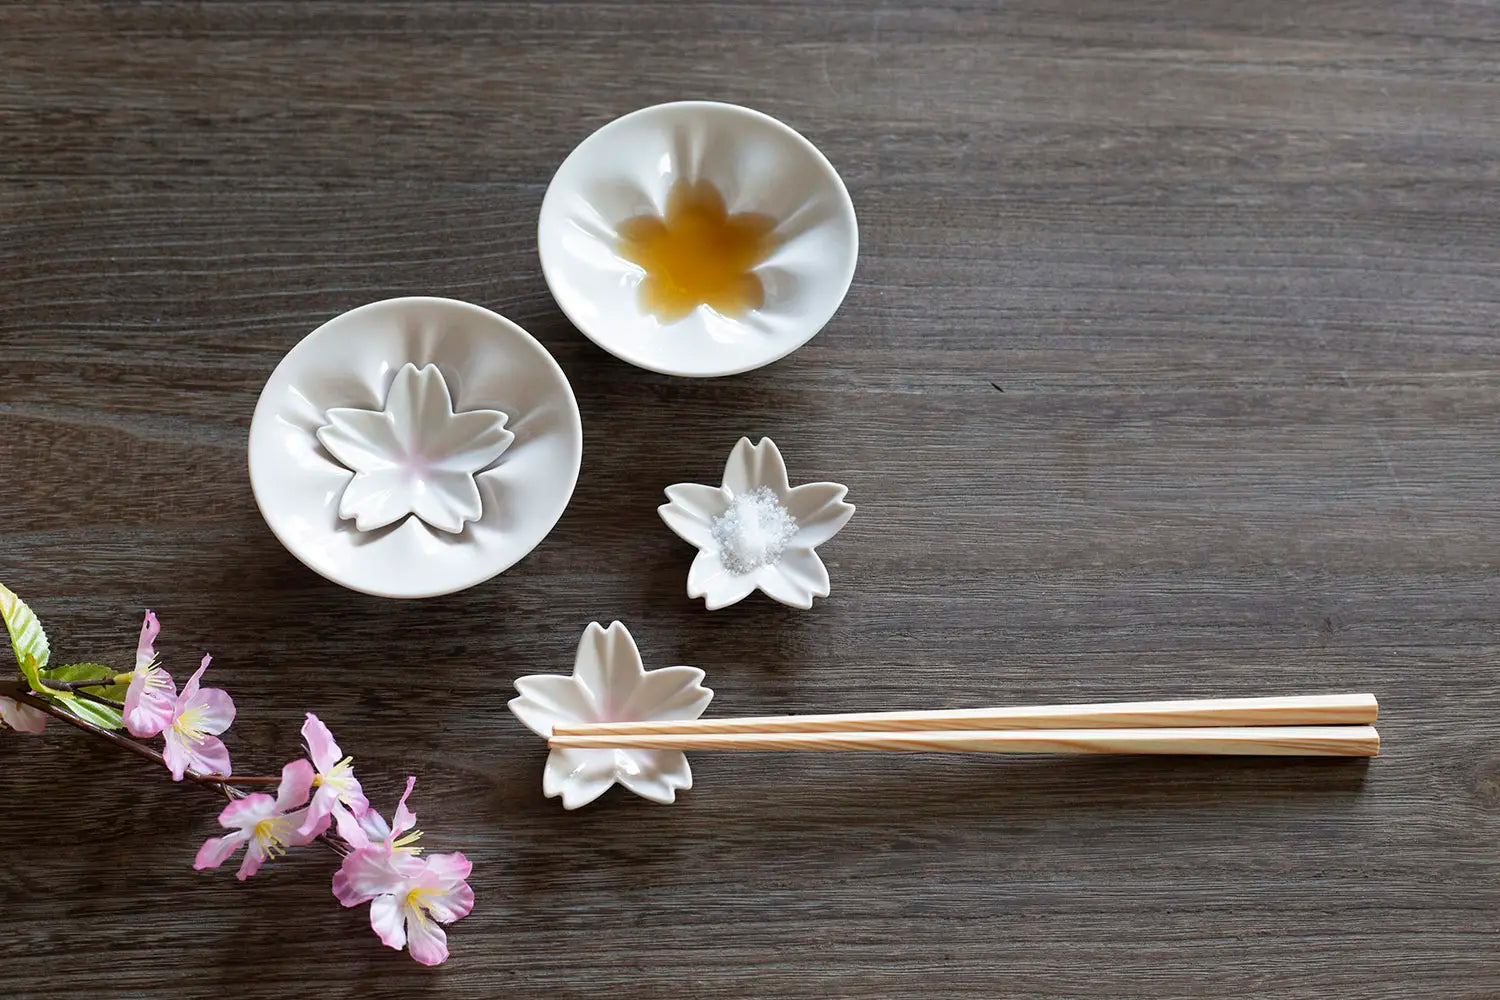 hiracle Sakura plates with sauces and used as chopstick rests.